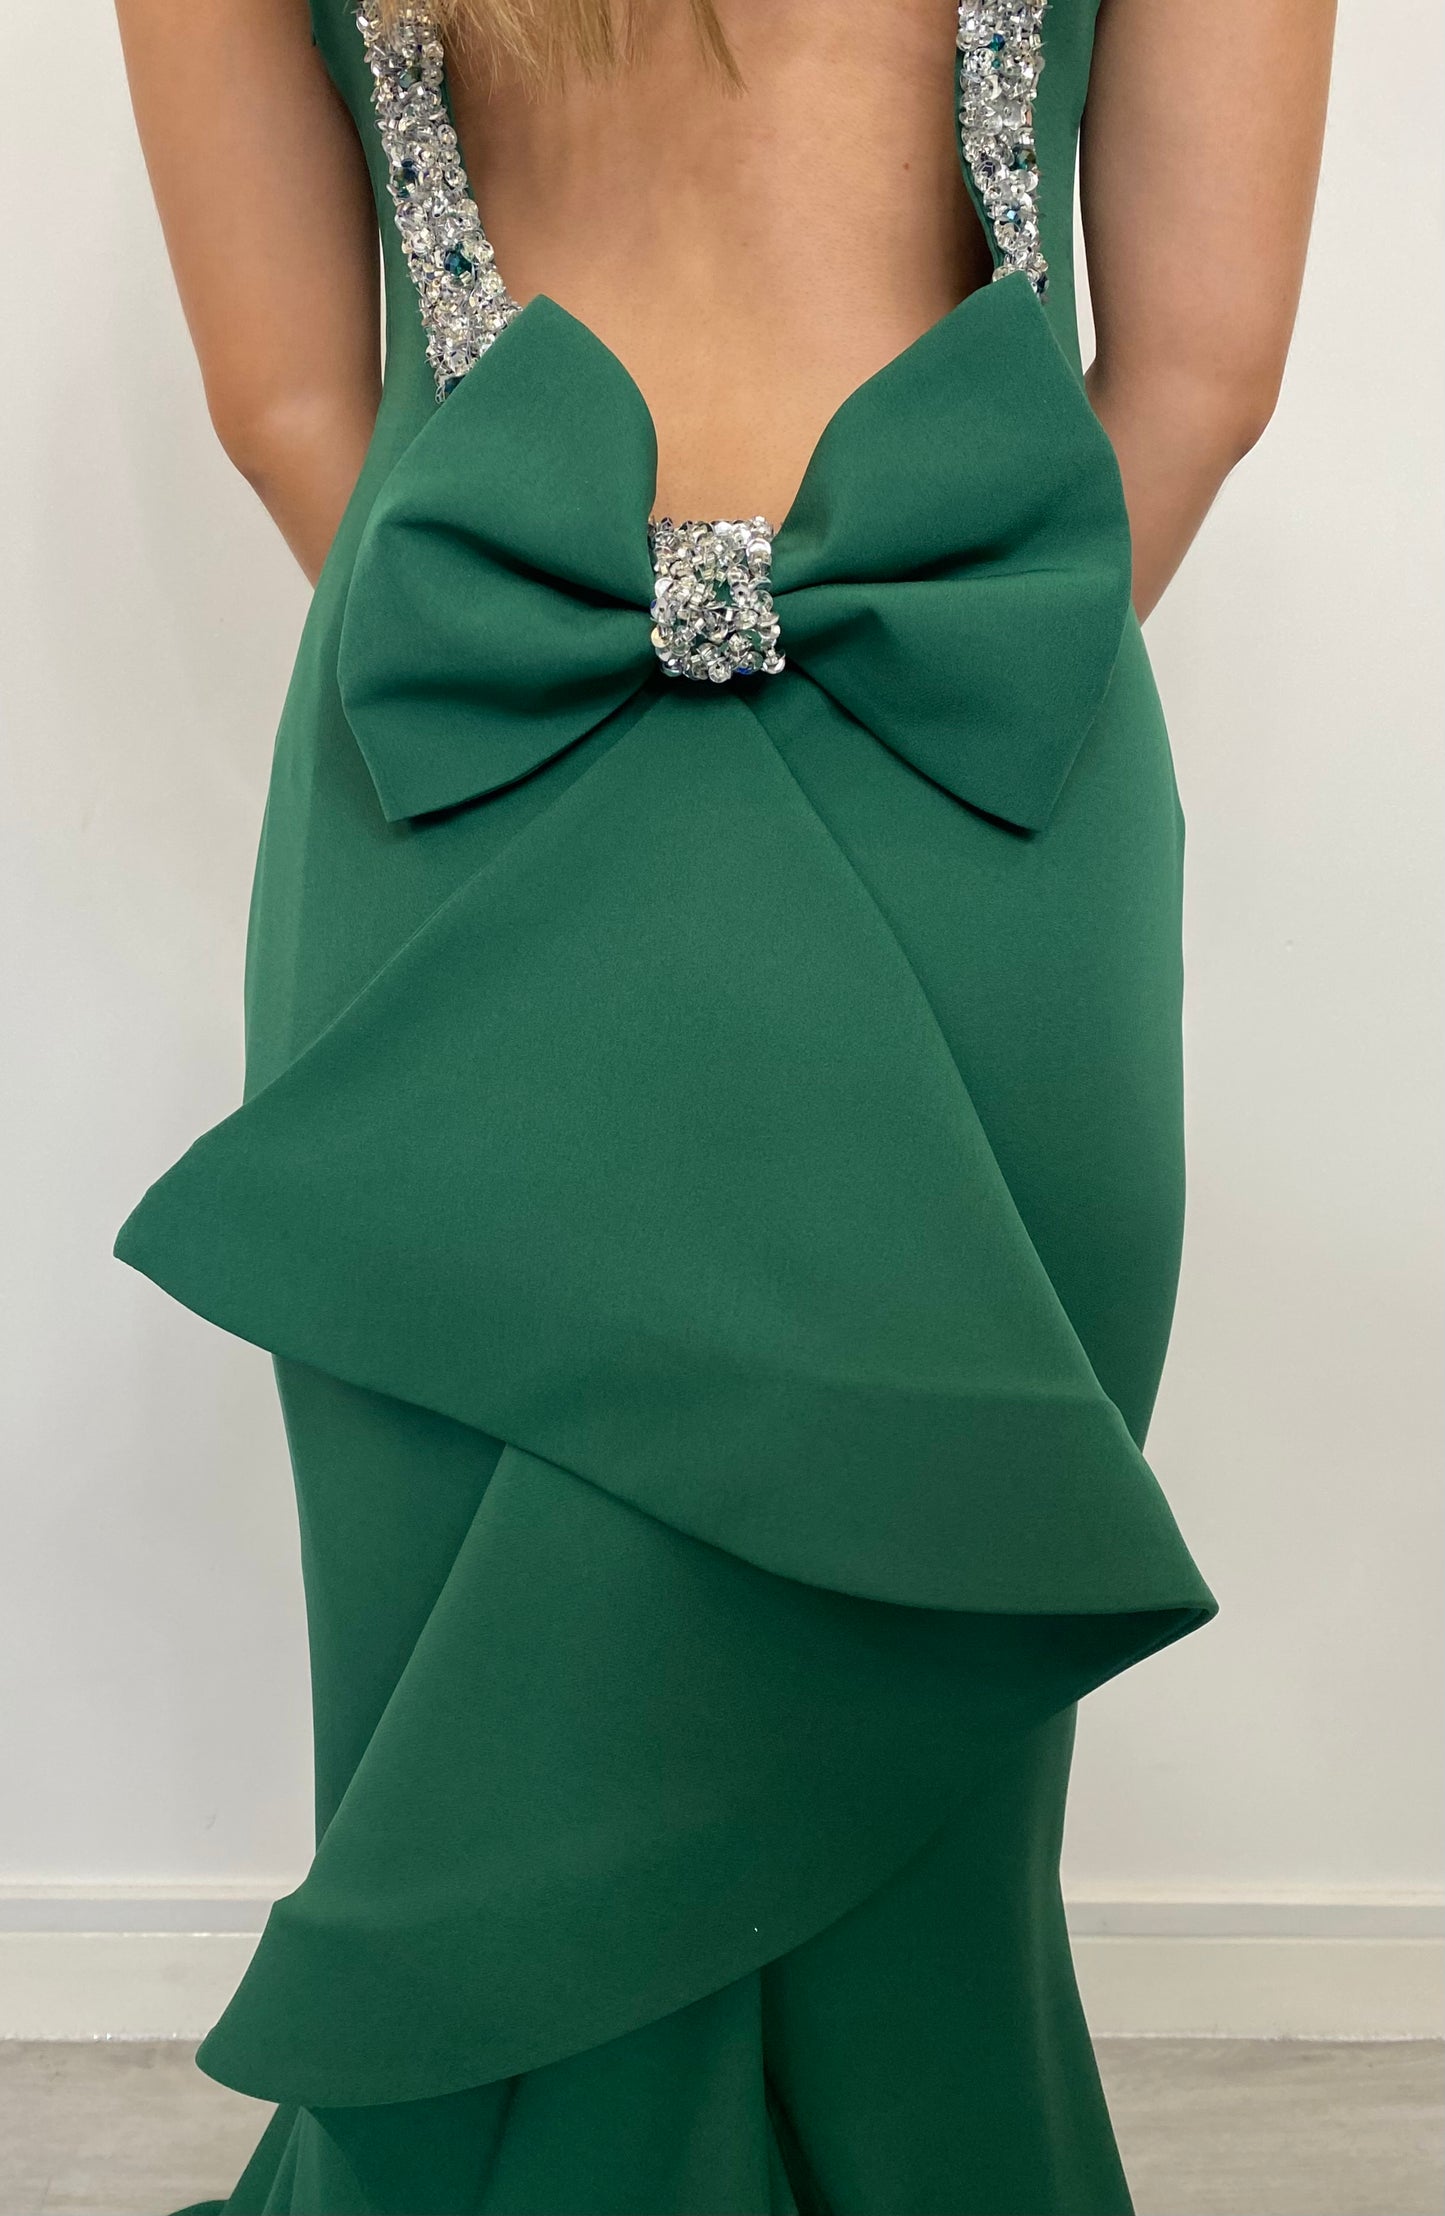 Emerald High Neck Dress with Embellished Collar